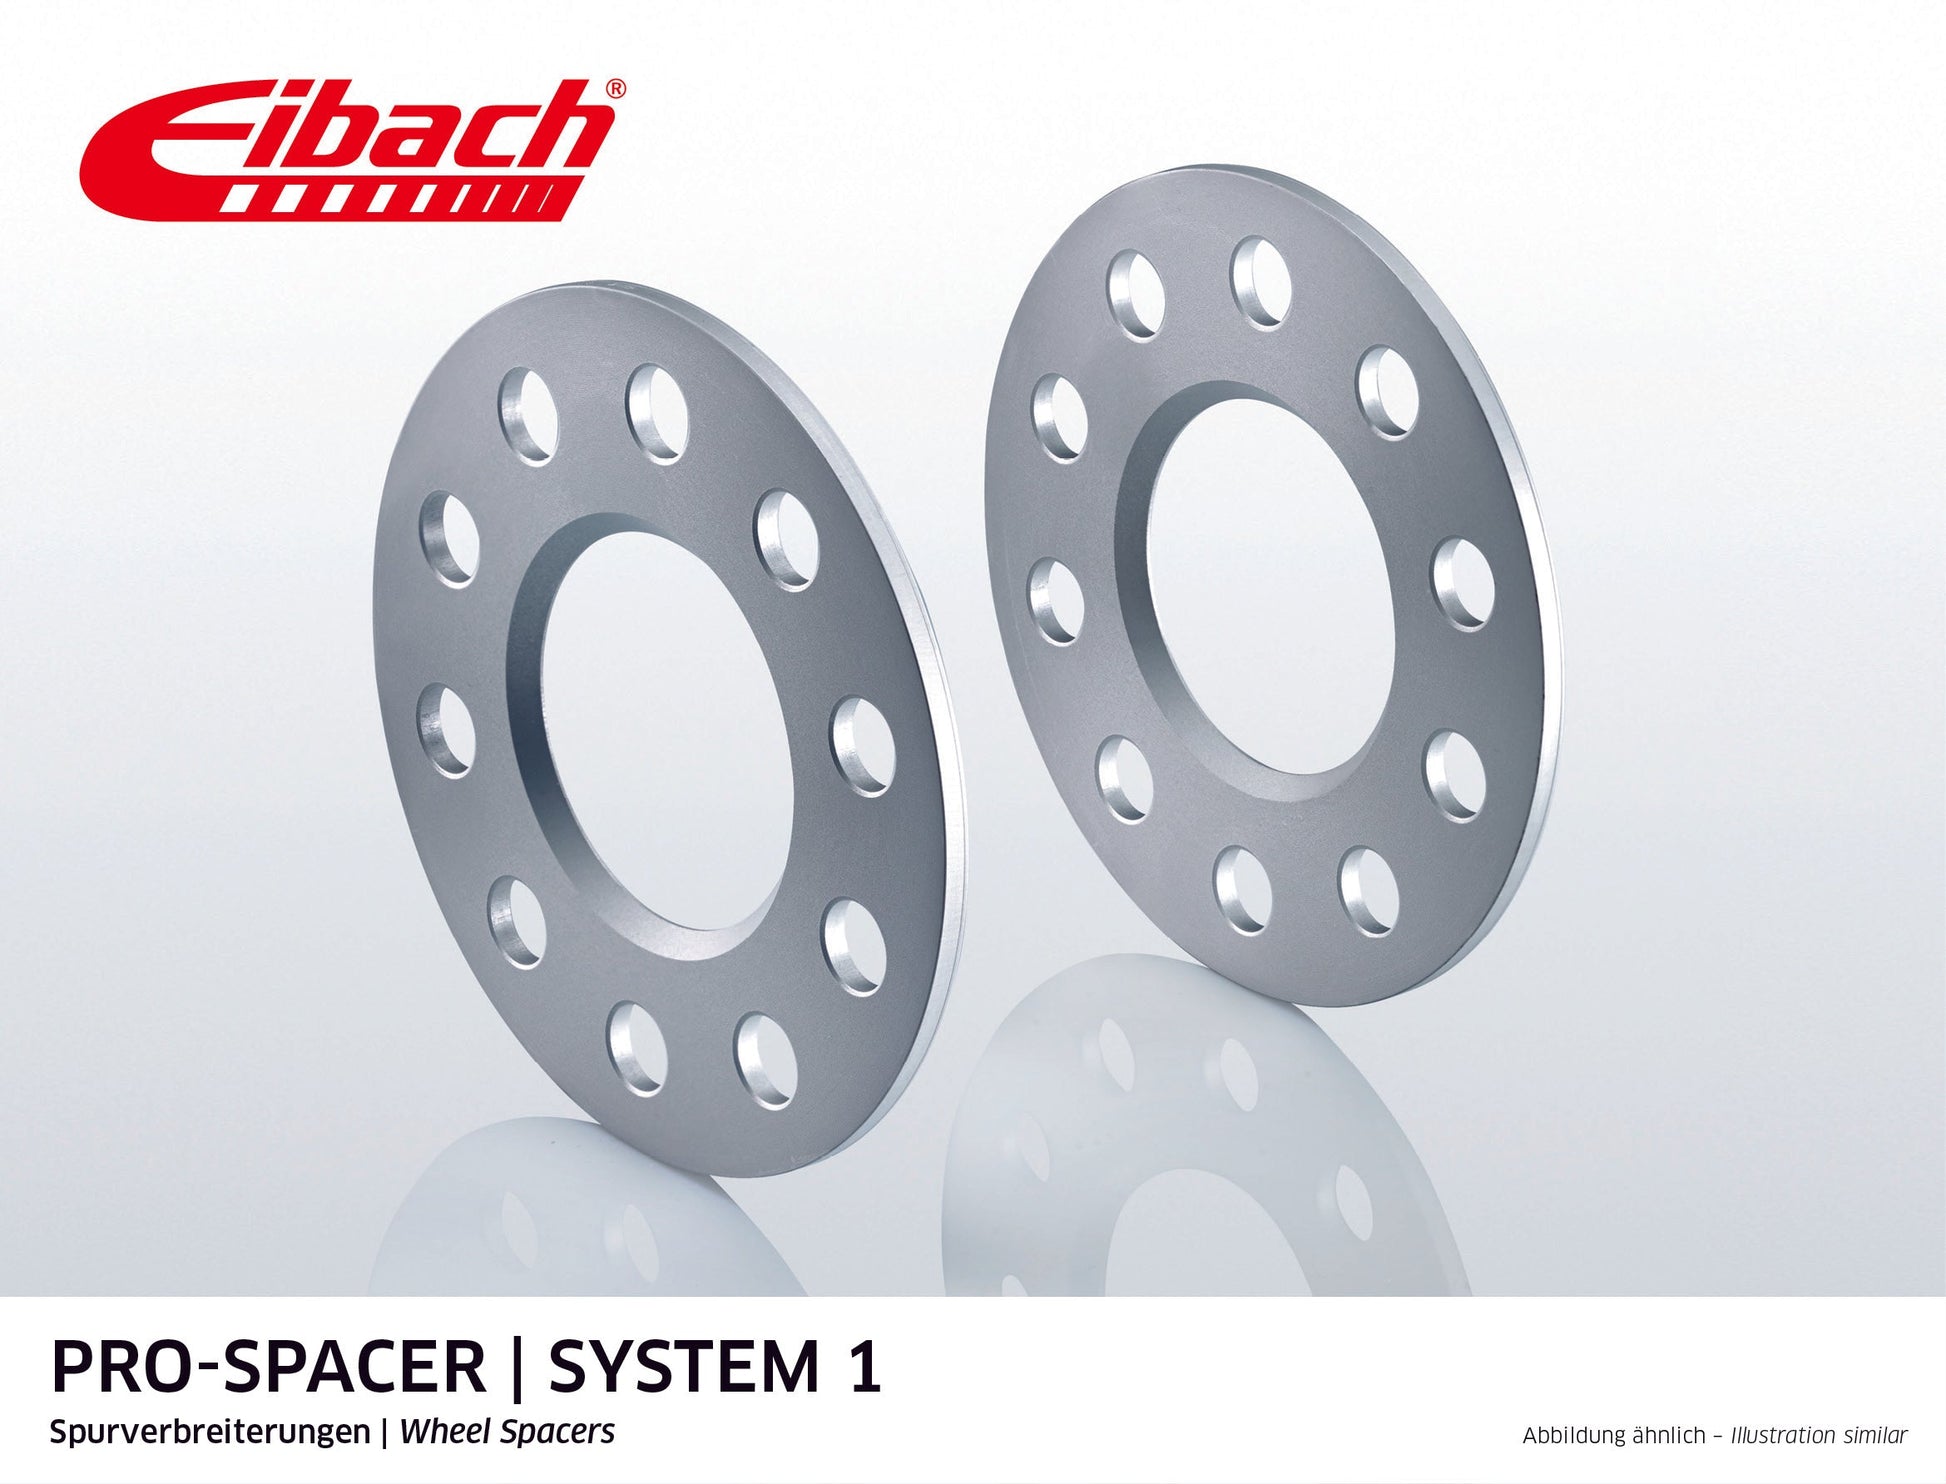 Eibach Pro-Spacer Kit (Pair Of Spacers) 5mm Per Spacer (System 1) S90-1-05-015 (Silver) at £59.42